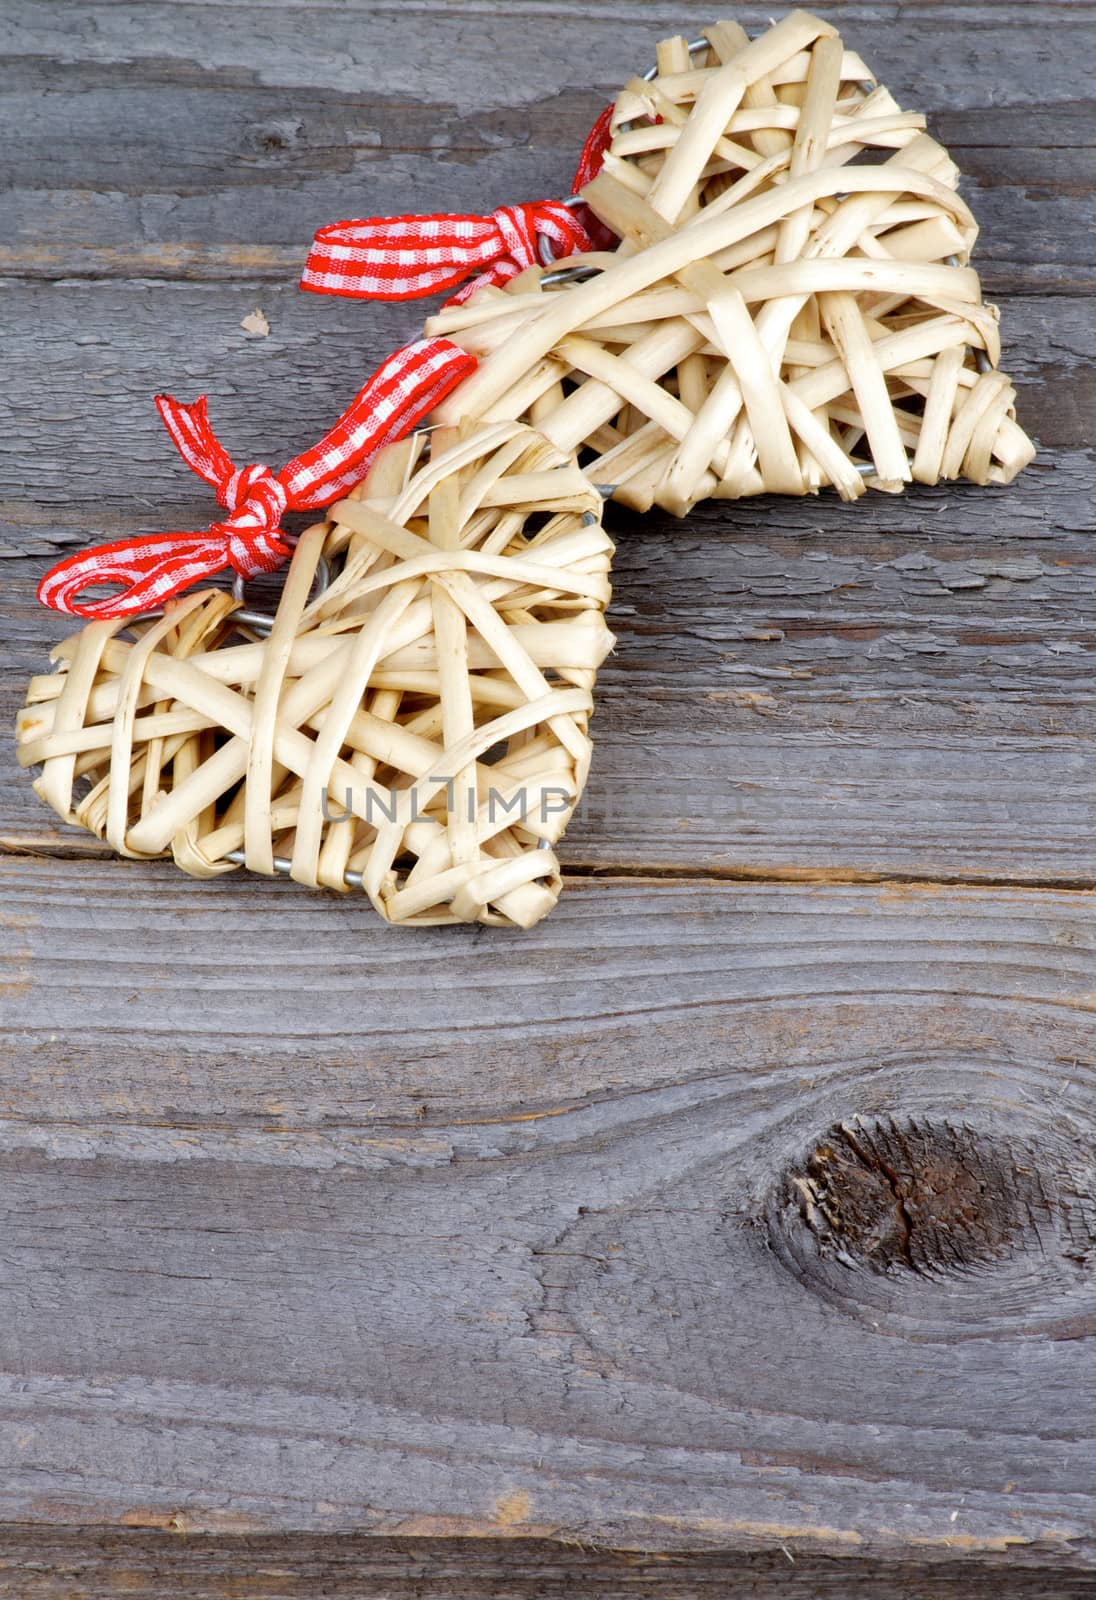 Two Handmade Wicker Hearts with Red Checkered Bows isolated on Rustic Wood background